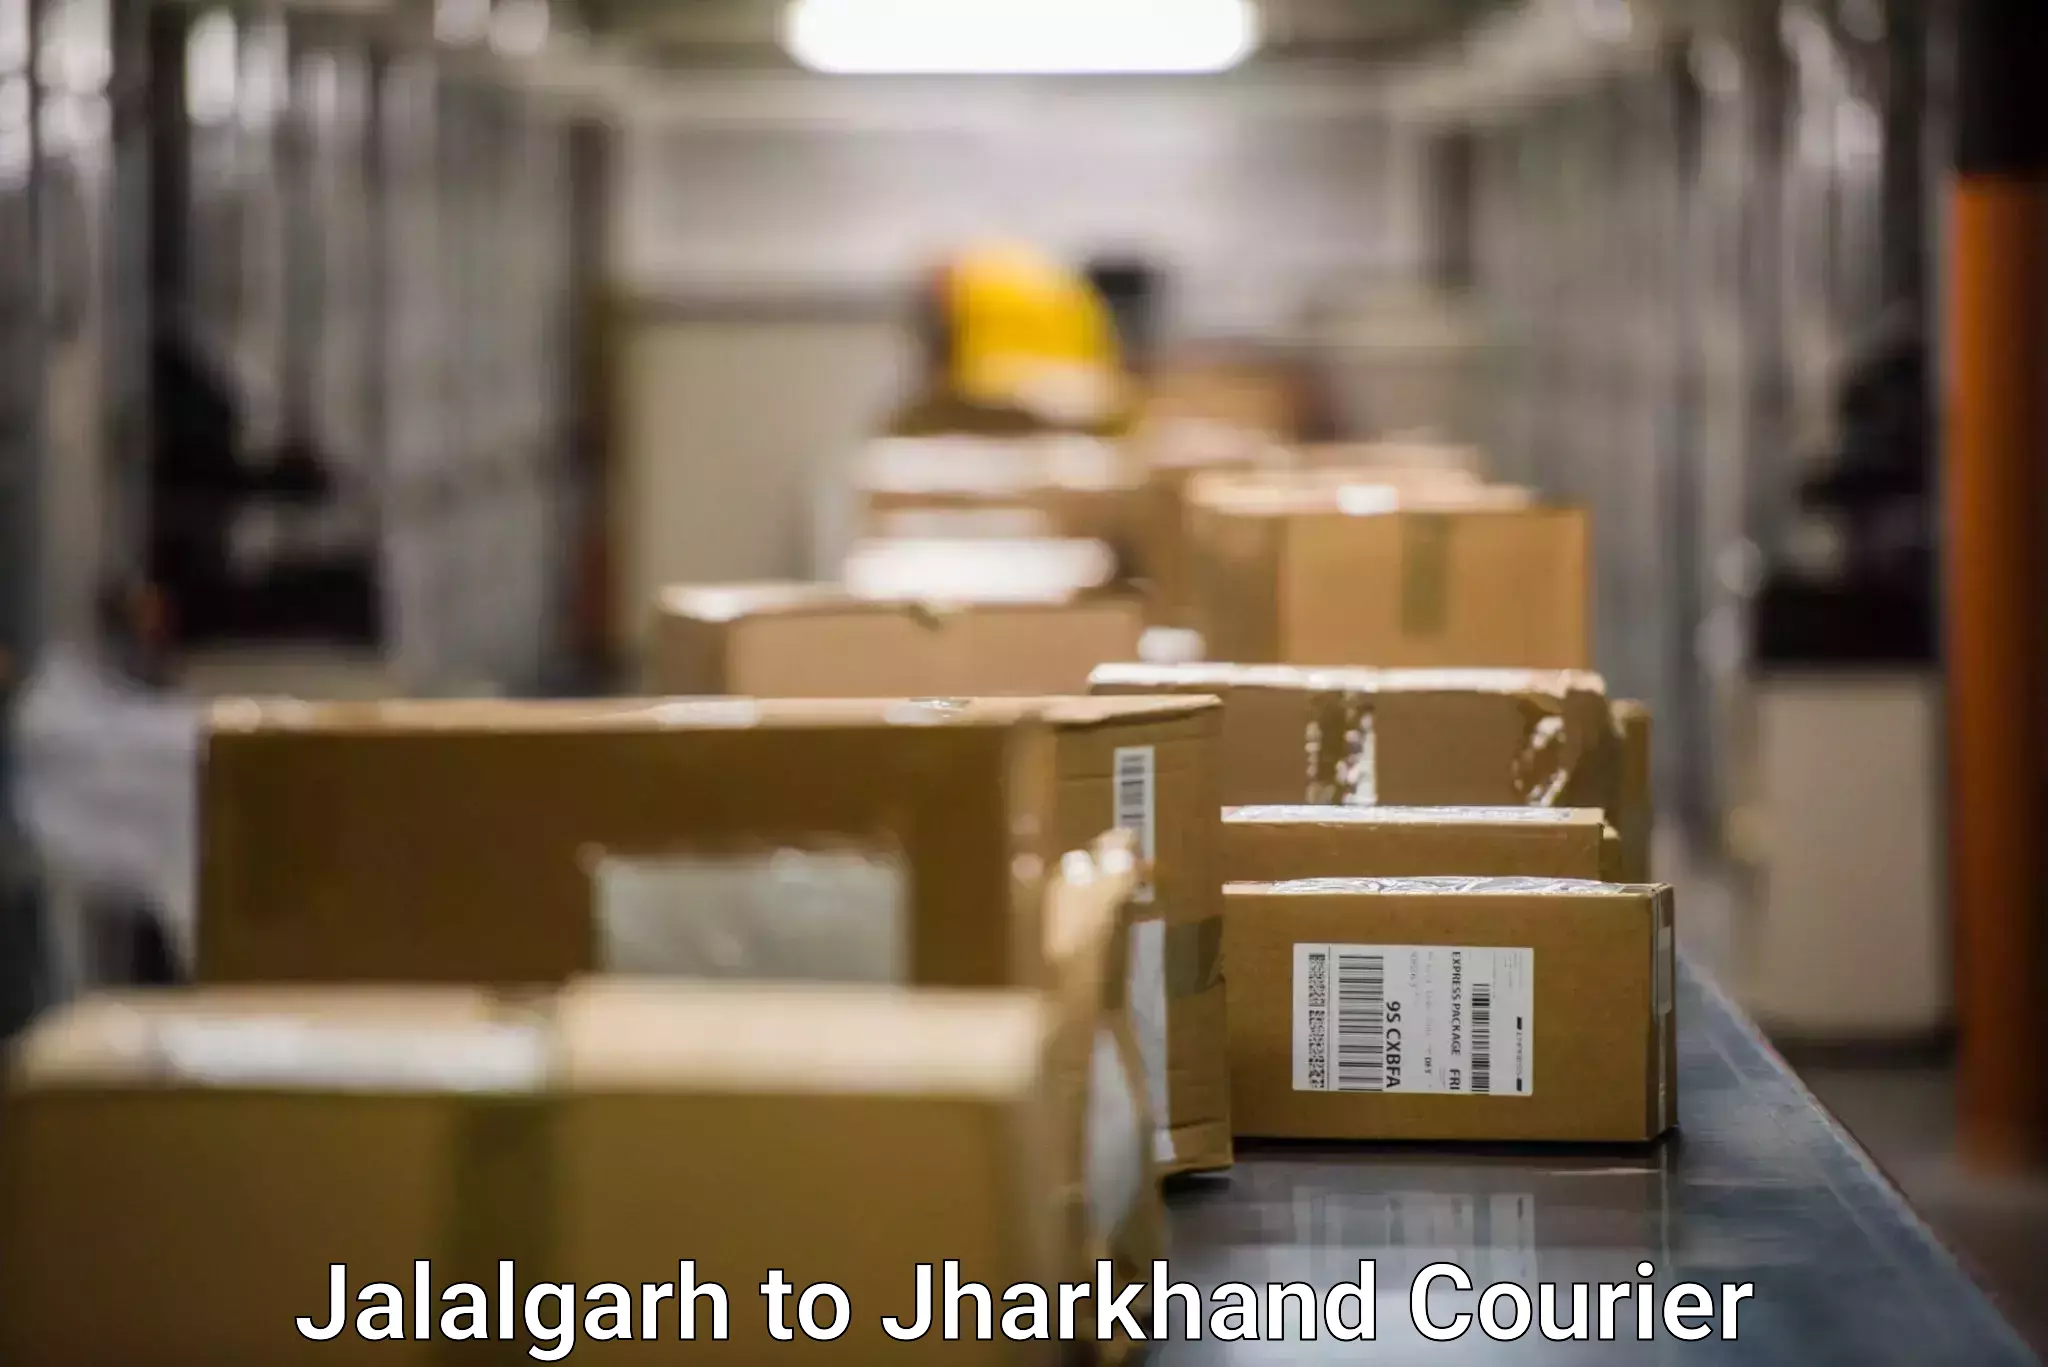 Expedited shipping methods Jalalgarh to Boarijore